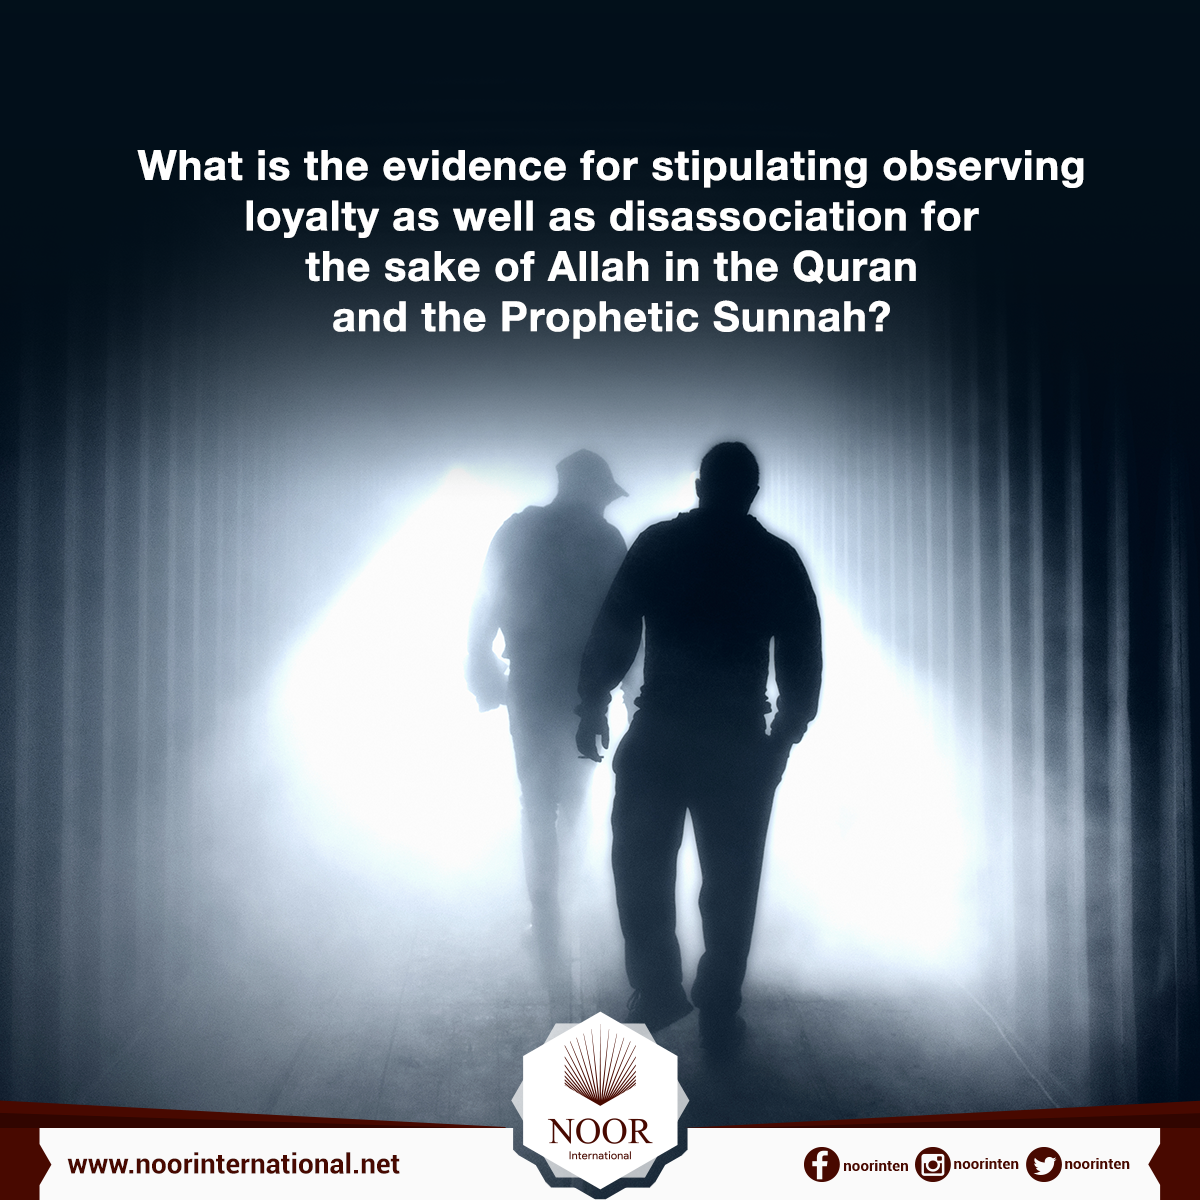 What is the evidence for stipulating observing loyalty as well as disassociation for the sake of Allah in the Quran and the Prophetic Sunnah?